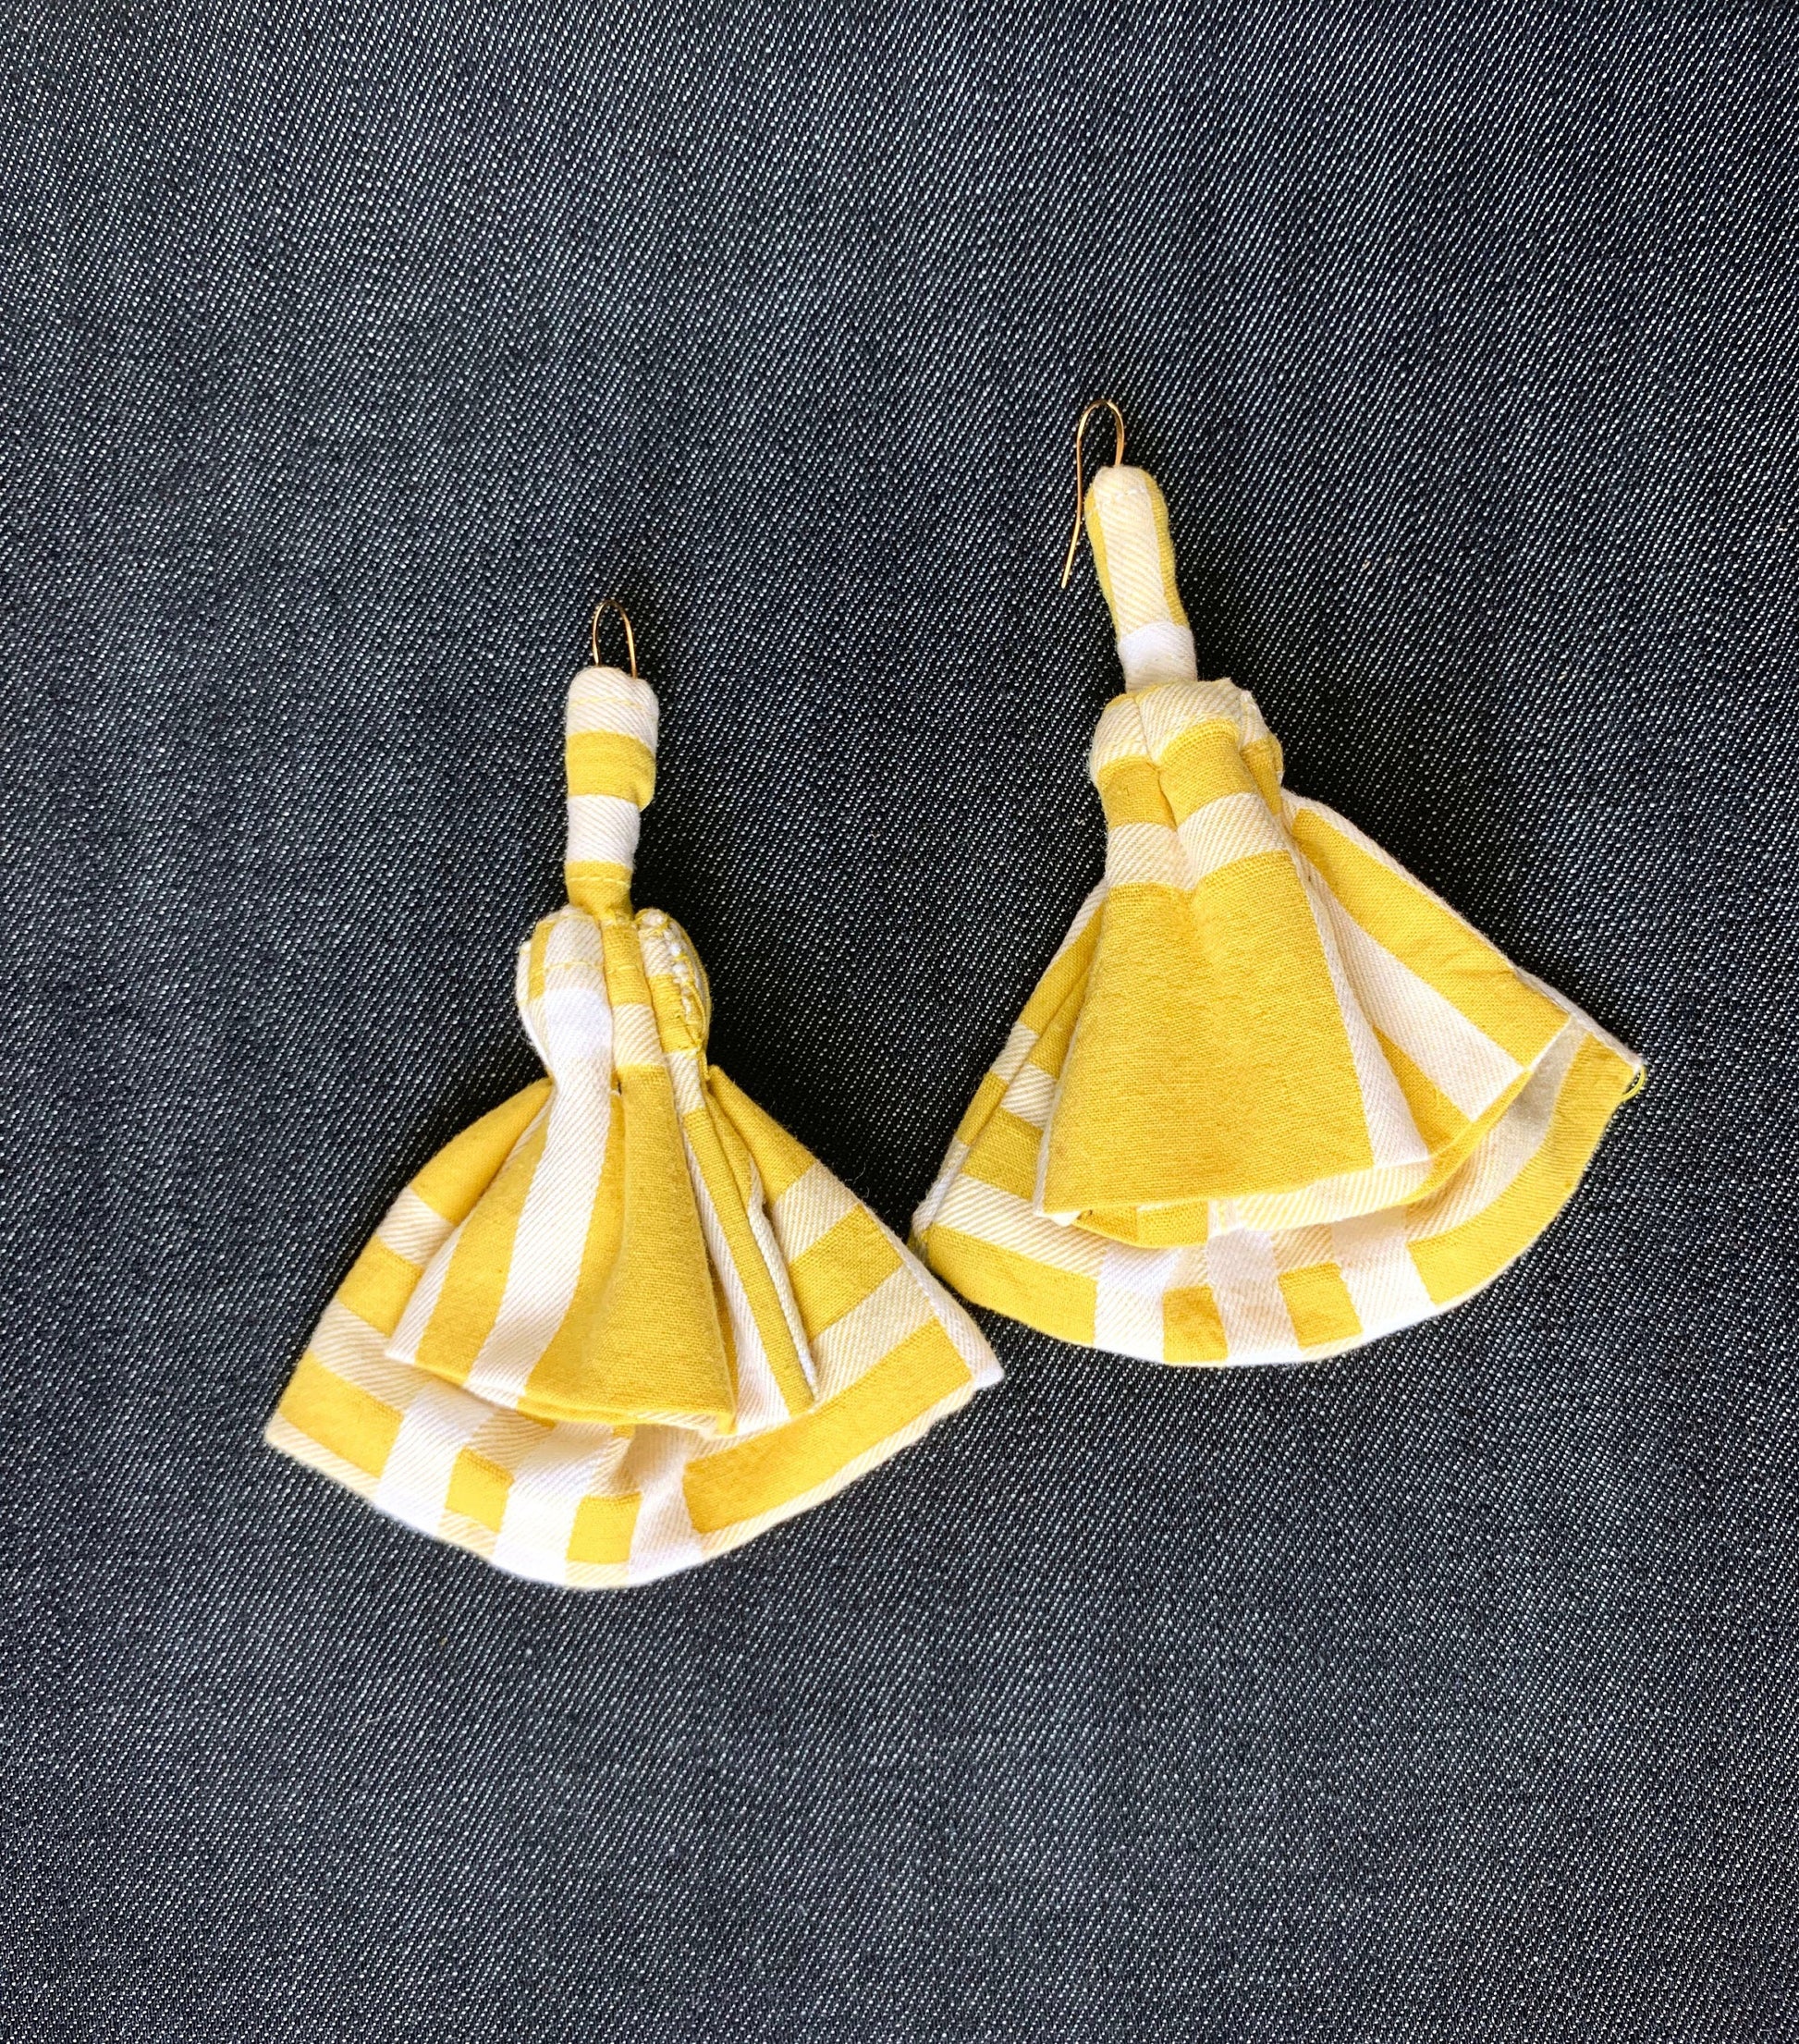 Yellow and White Plaid Fabric Earrings - Recycled Vintage Fabric